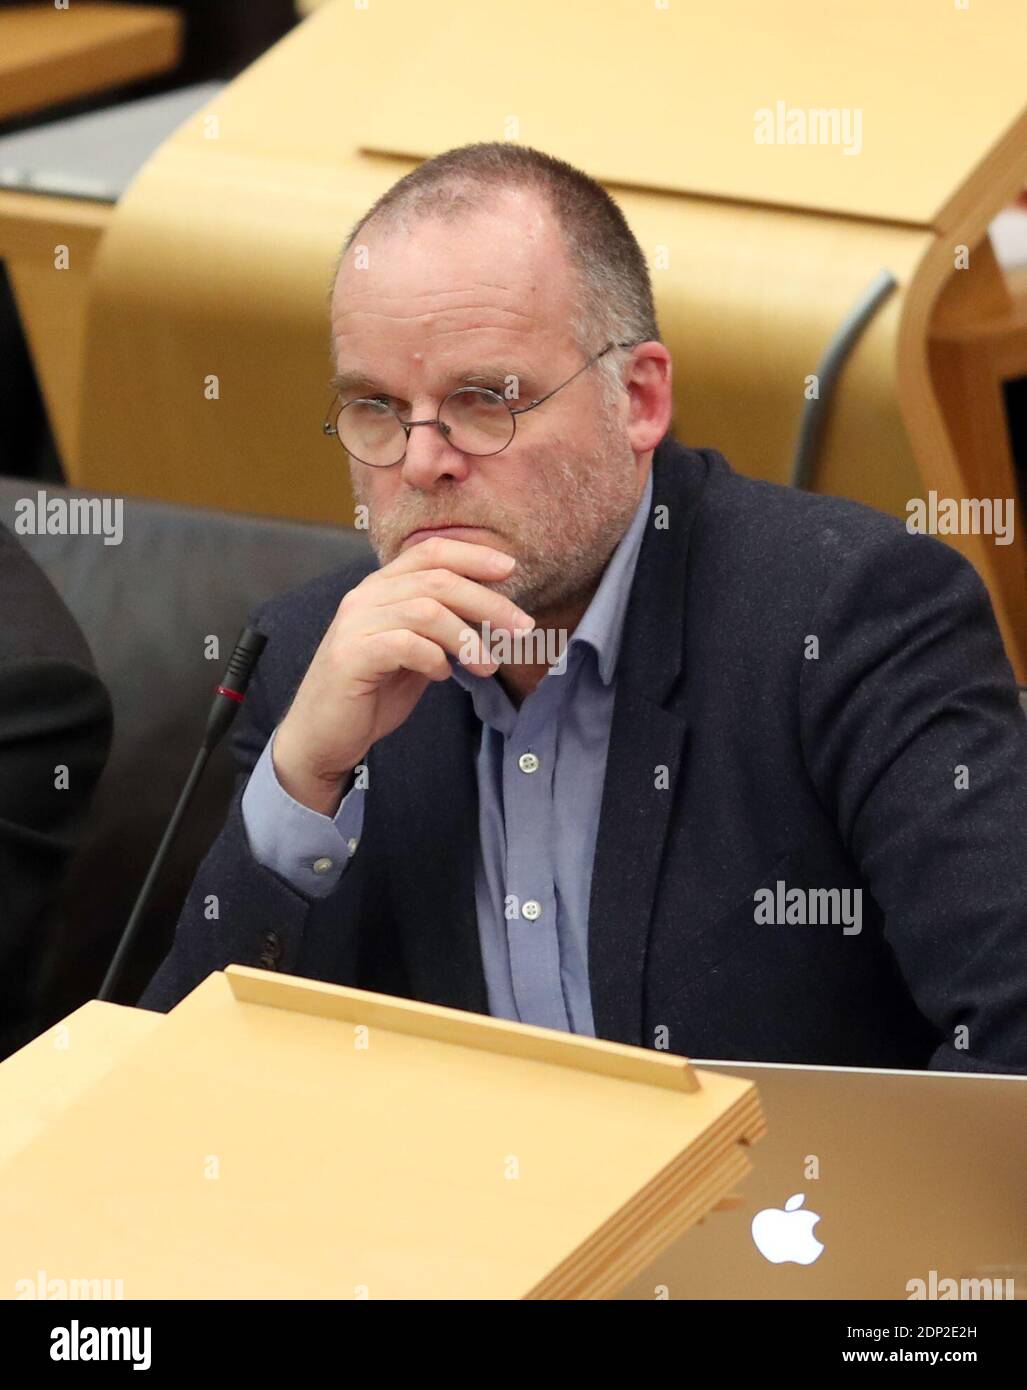 File photo dated 31/01/17 of Andy Wightman, who has resigned from the Scottish Green Party citing tension around transgender rights. Stock Photo